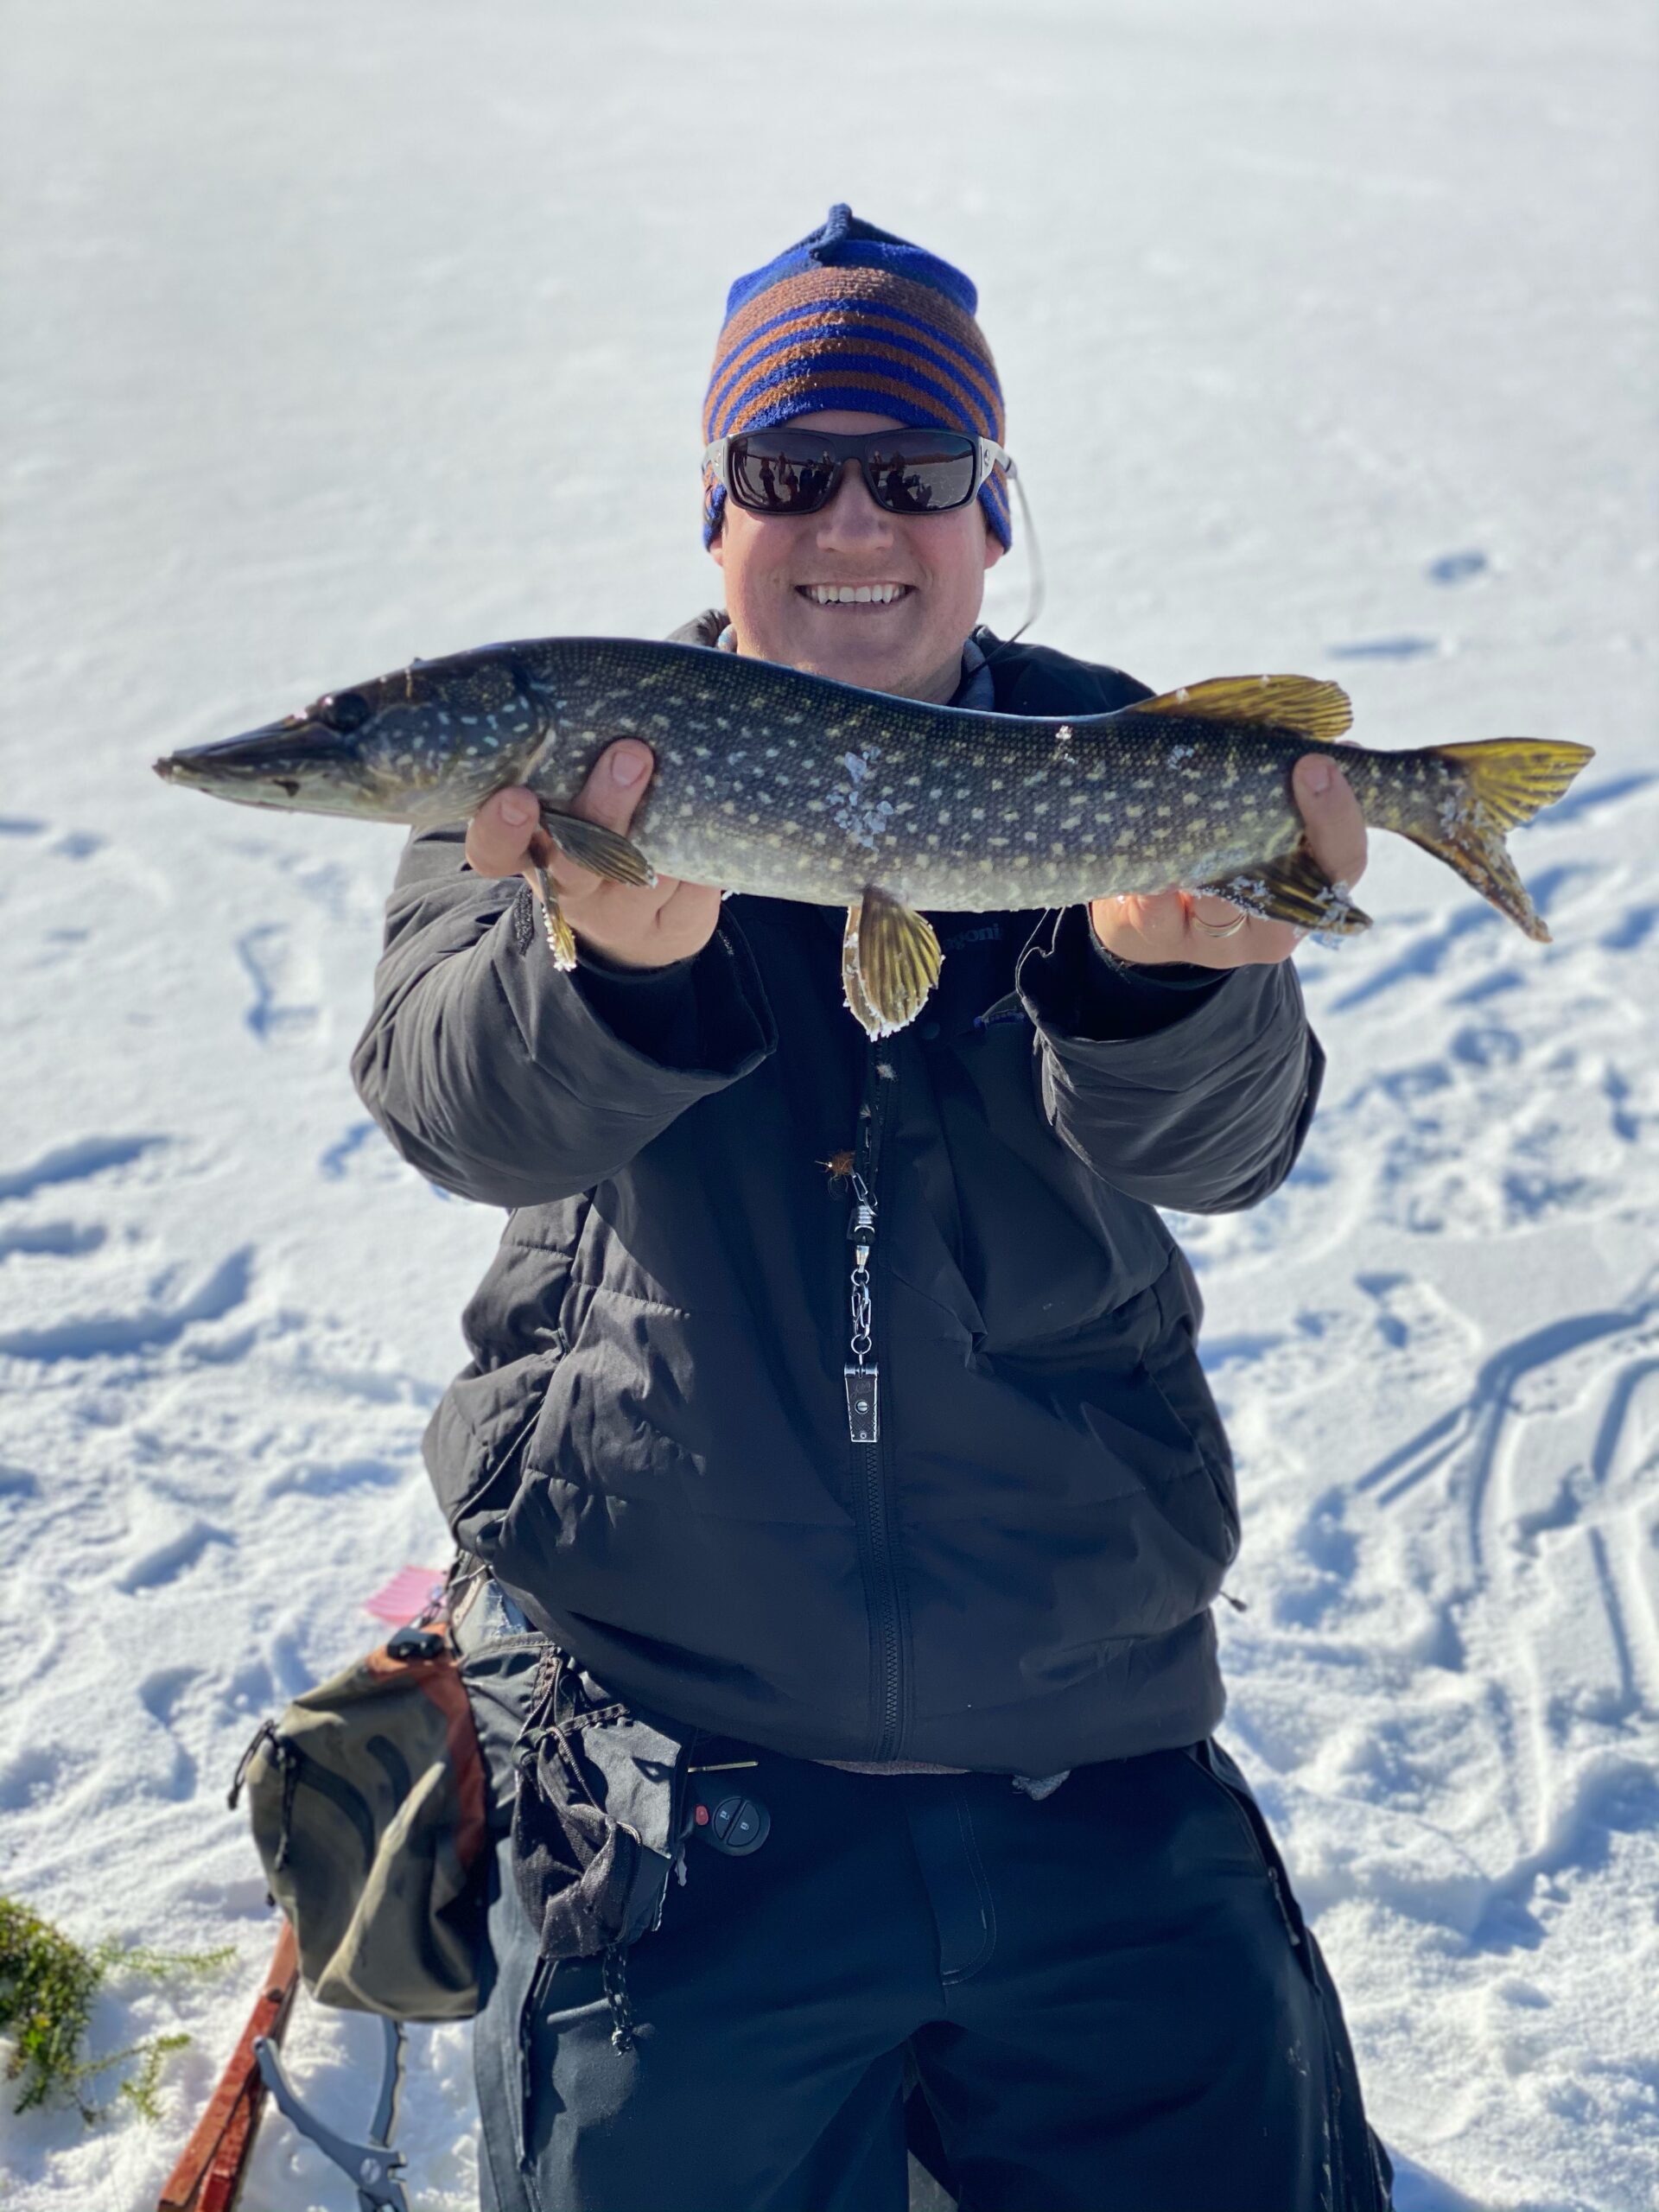 Meet our ADK Ice Fishing Guides